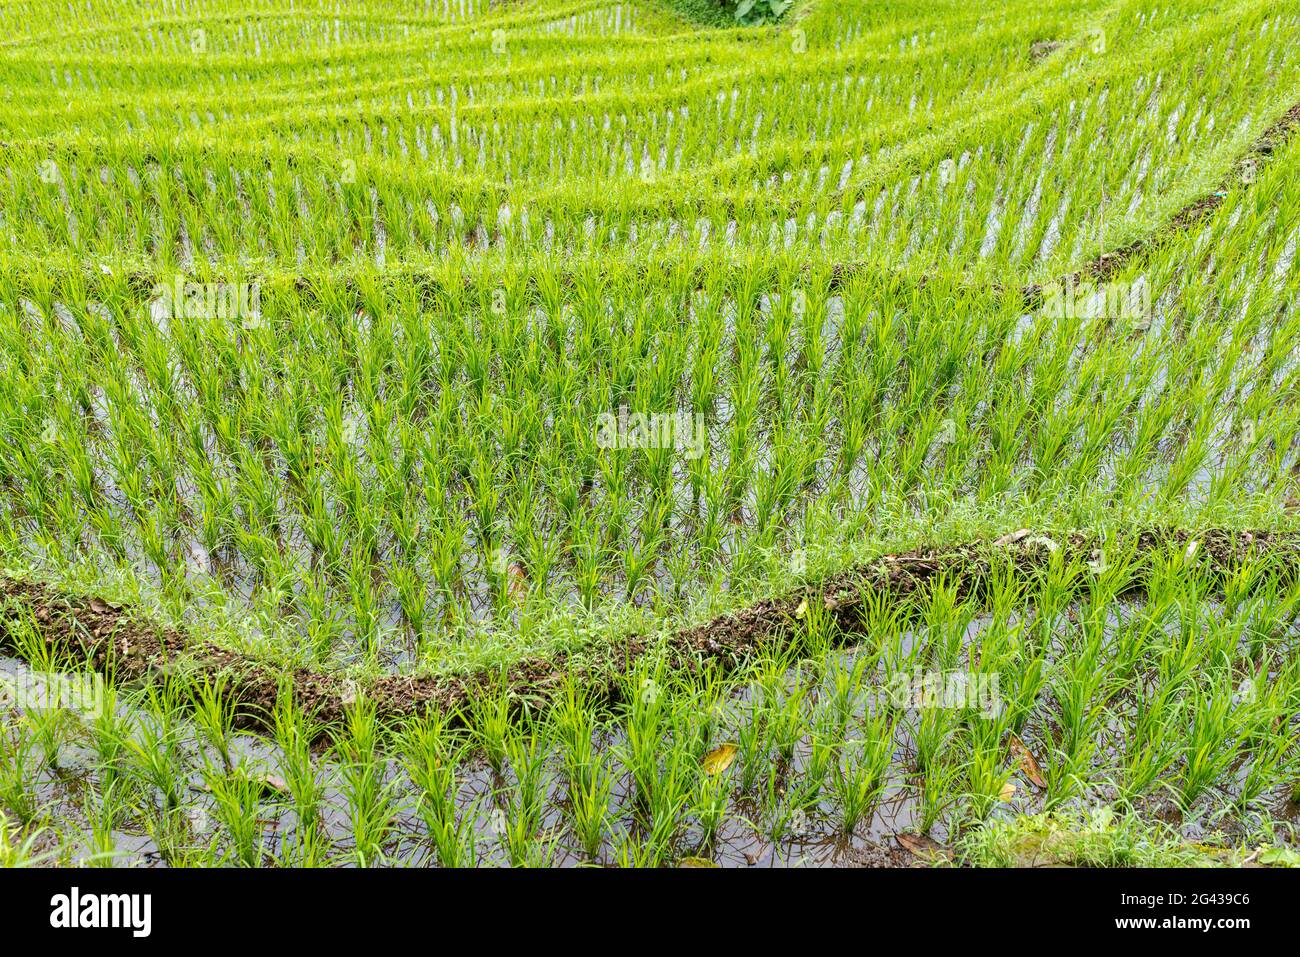 Landscape with terraced rice fields in Tana Toraja on Sulawesi Stock Photo